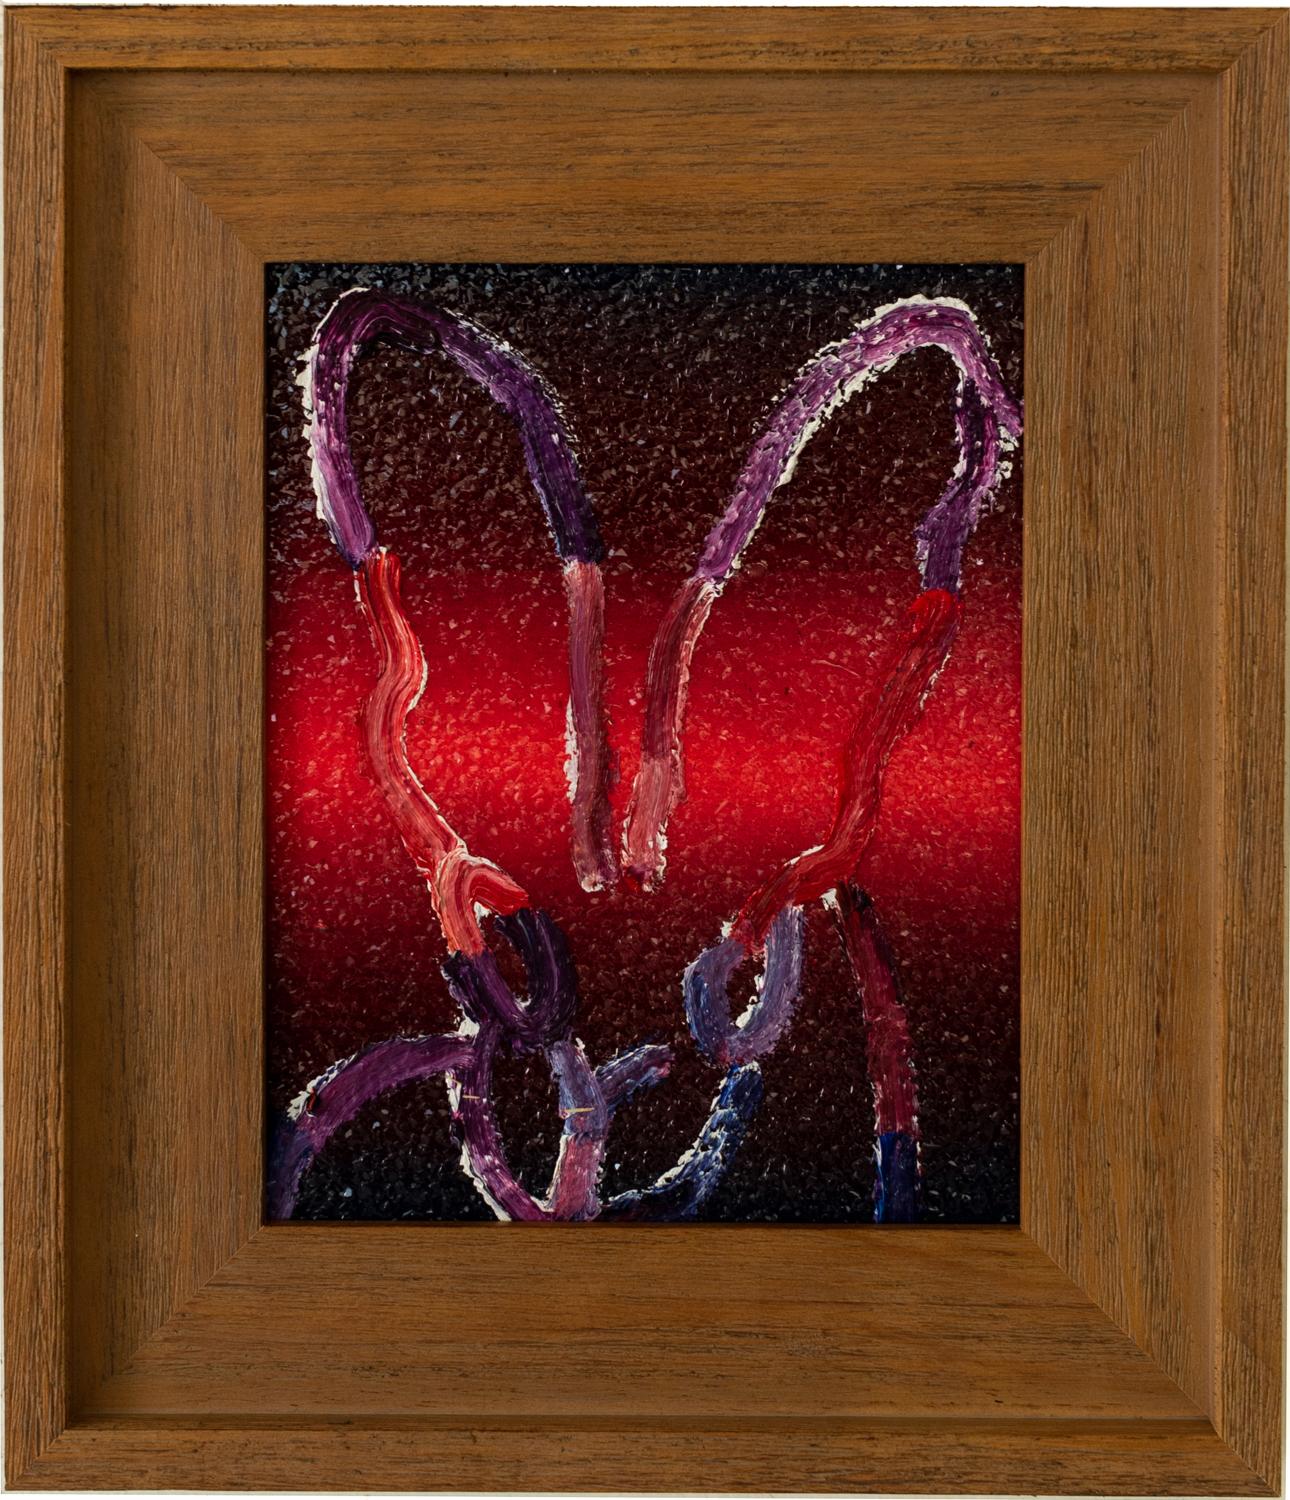 Hunt Slonem bunny oil painting 'Mauve', 2021. Oil and diamond dust on wood, 10 x 8 in. / Frame: 14.5 x 12.5 in. This painting features Slonem's signature bunny outlined in purple and white over a red and black diamond dust background. Includes an